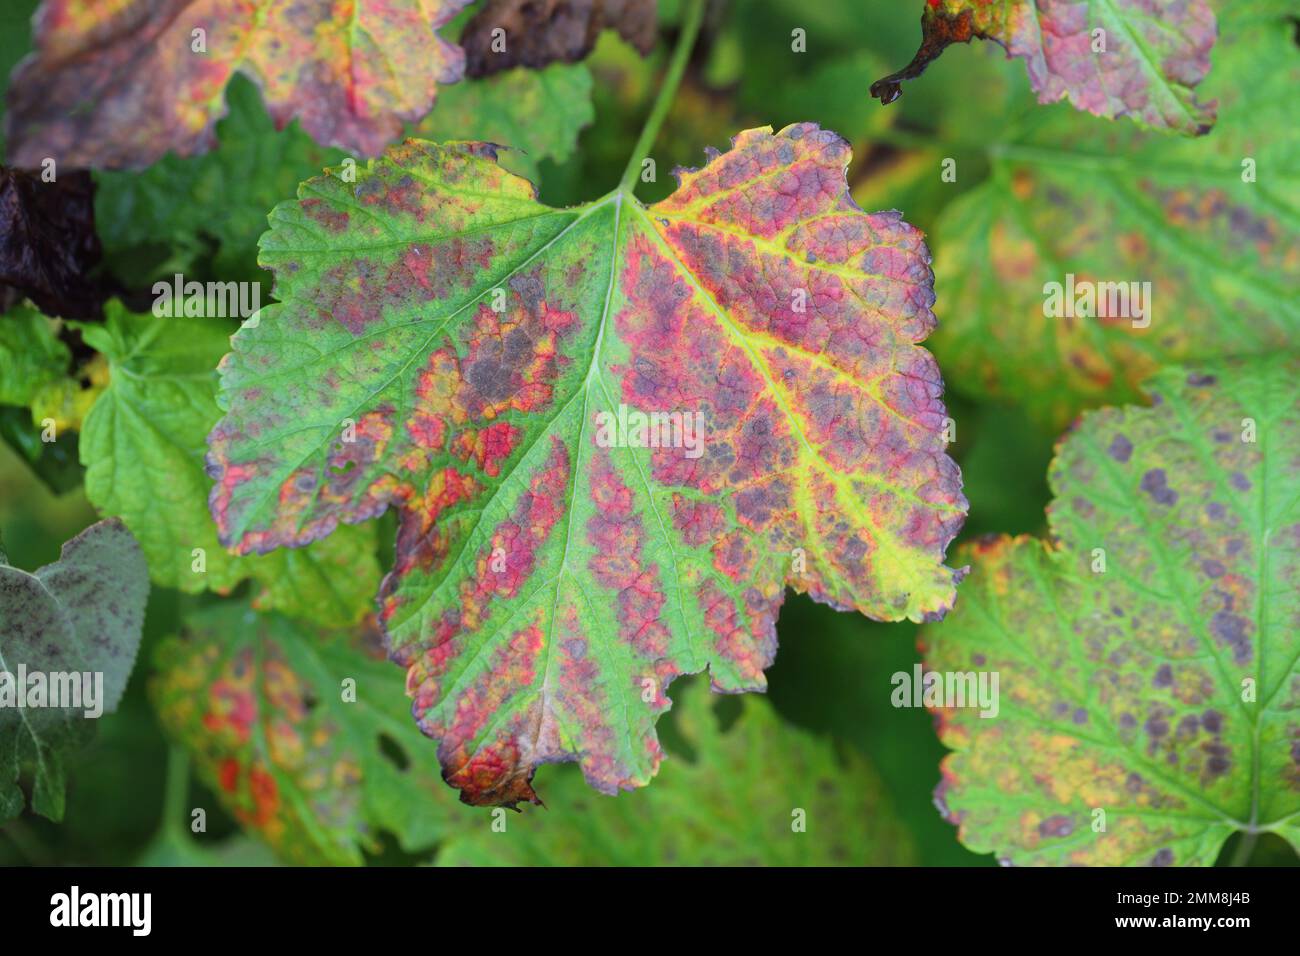 Black currant leaves in the garden discolored in different colors, red, yellow in autumn. Stock Photo